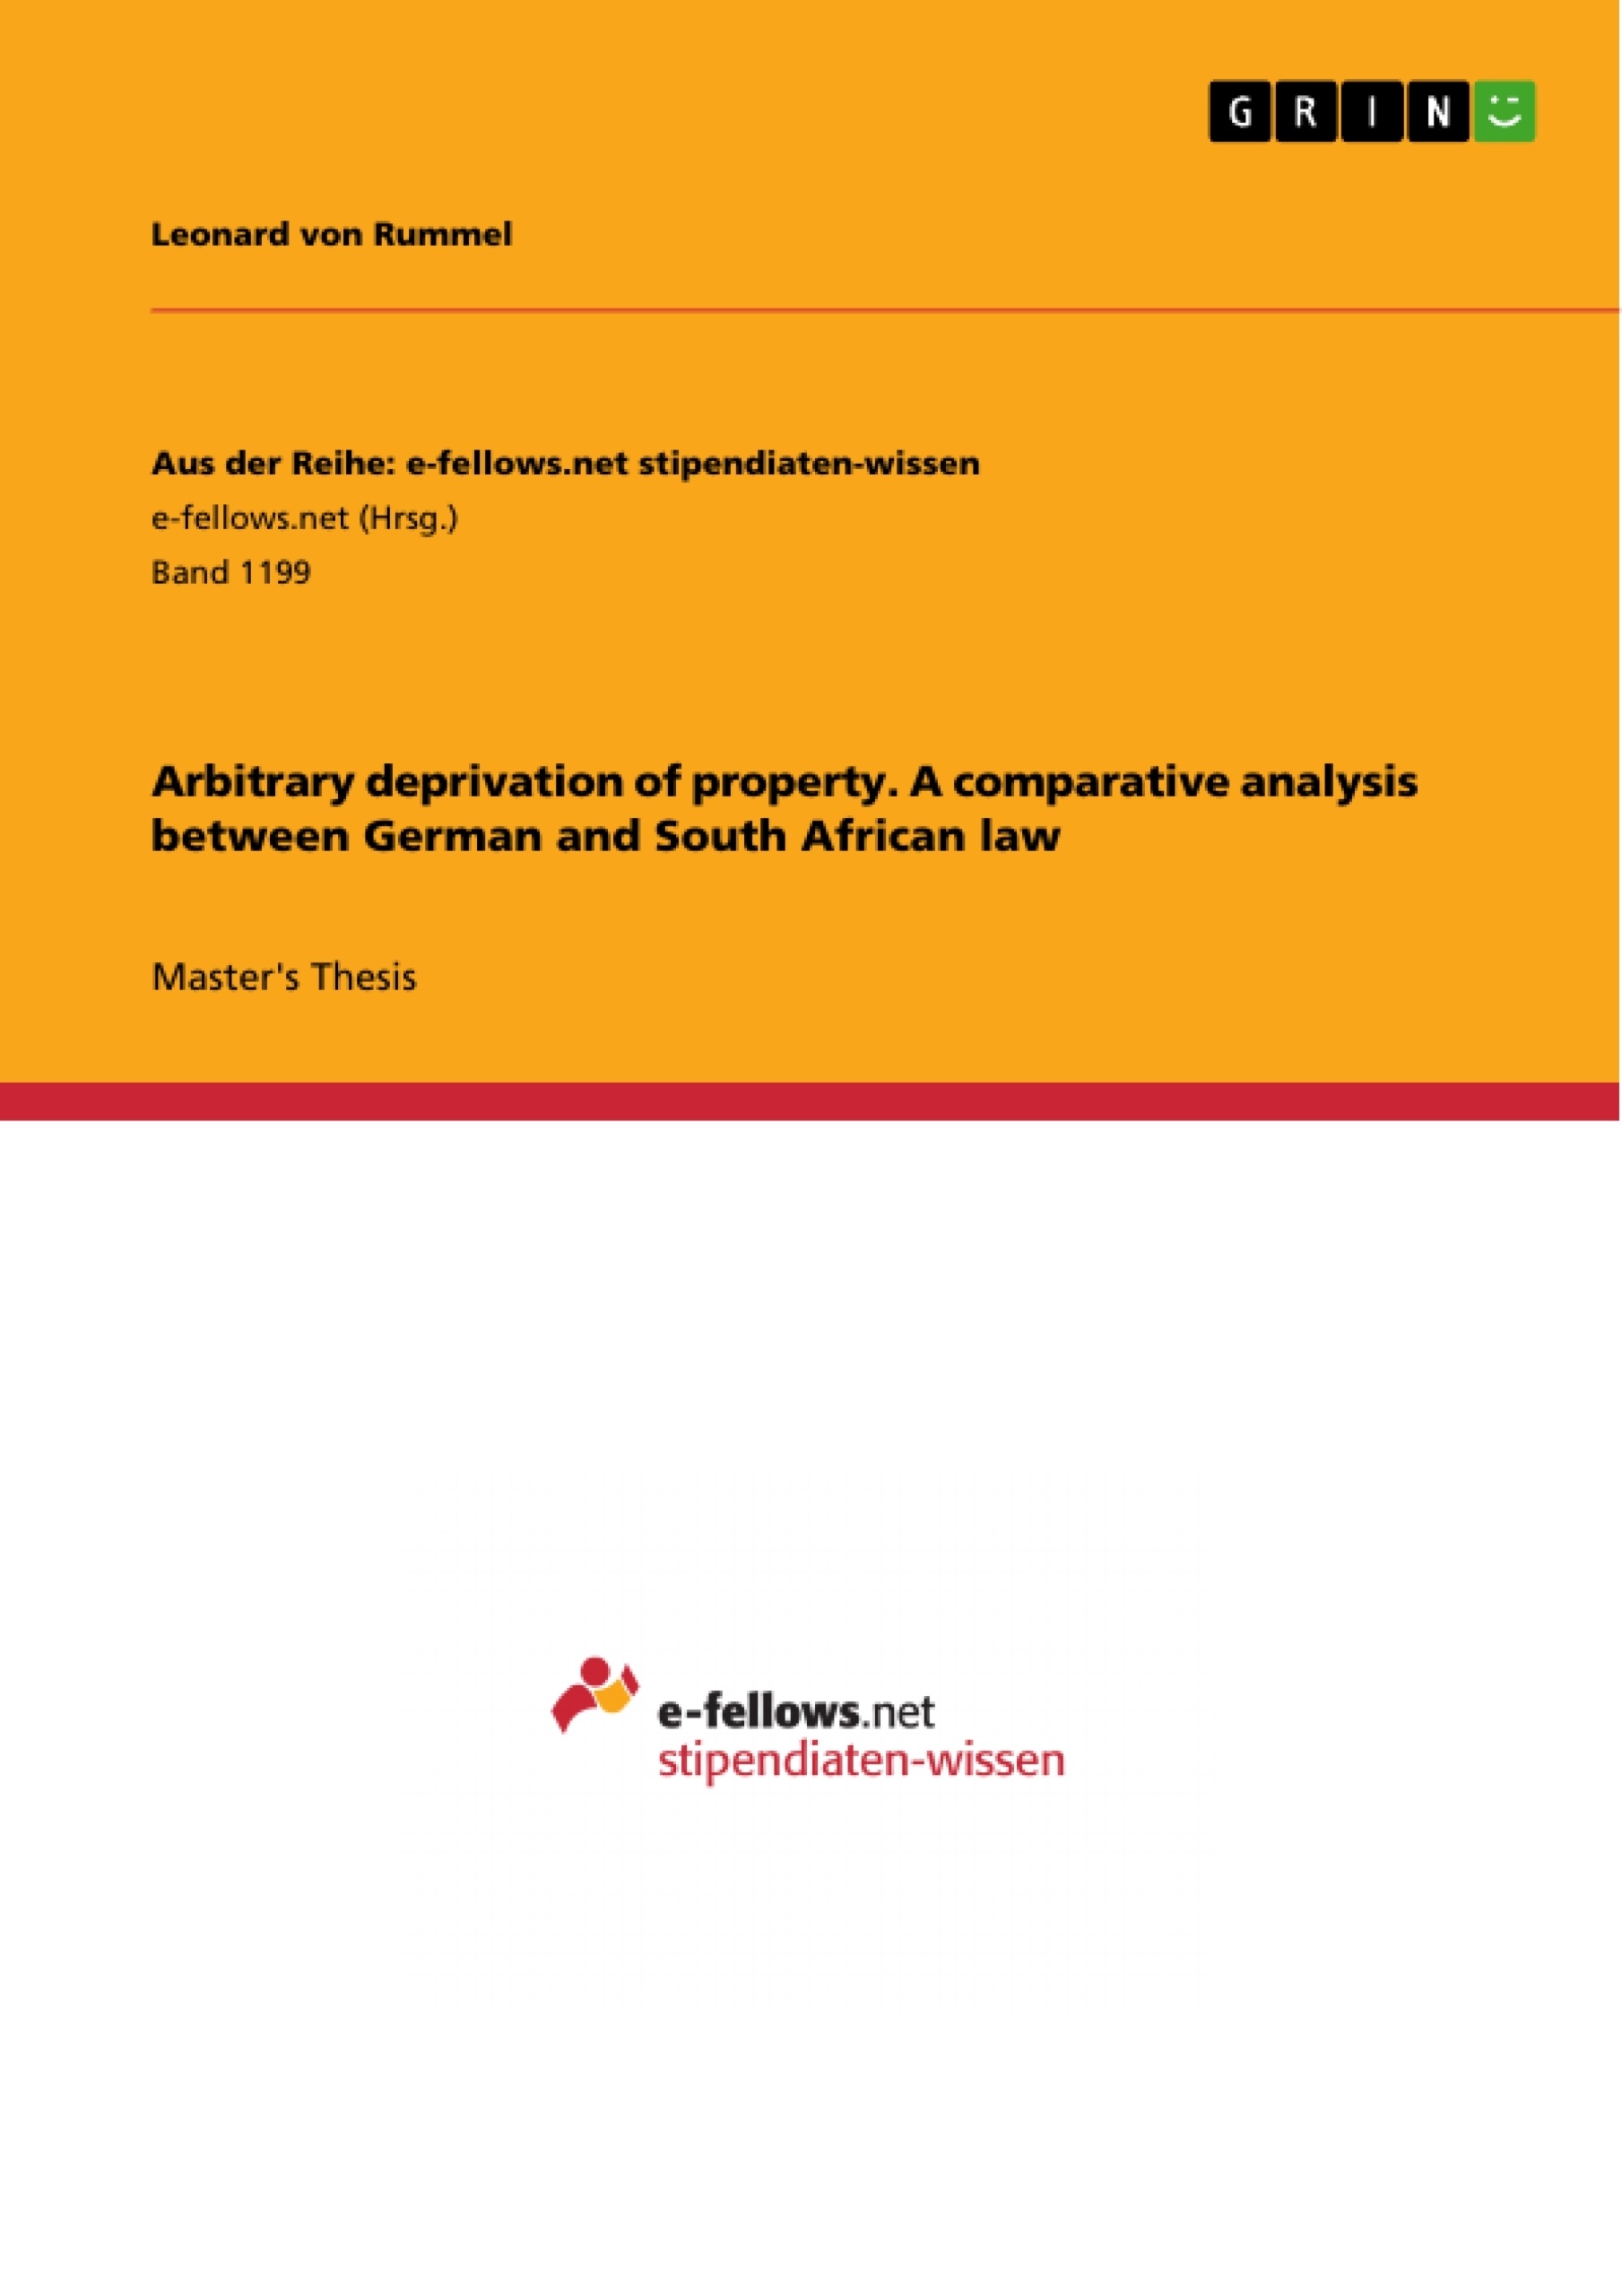 Title: Arbitrary deprivation of property. A comparative analysis between German and South African law